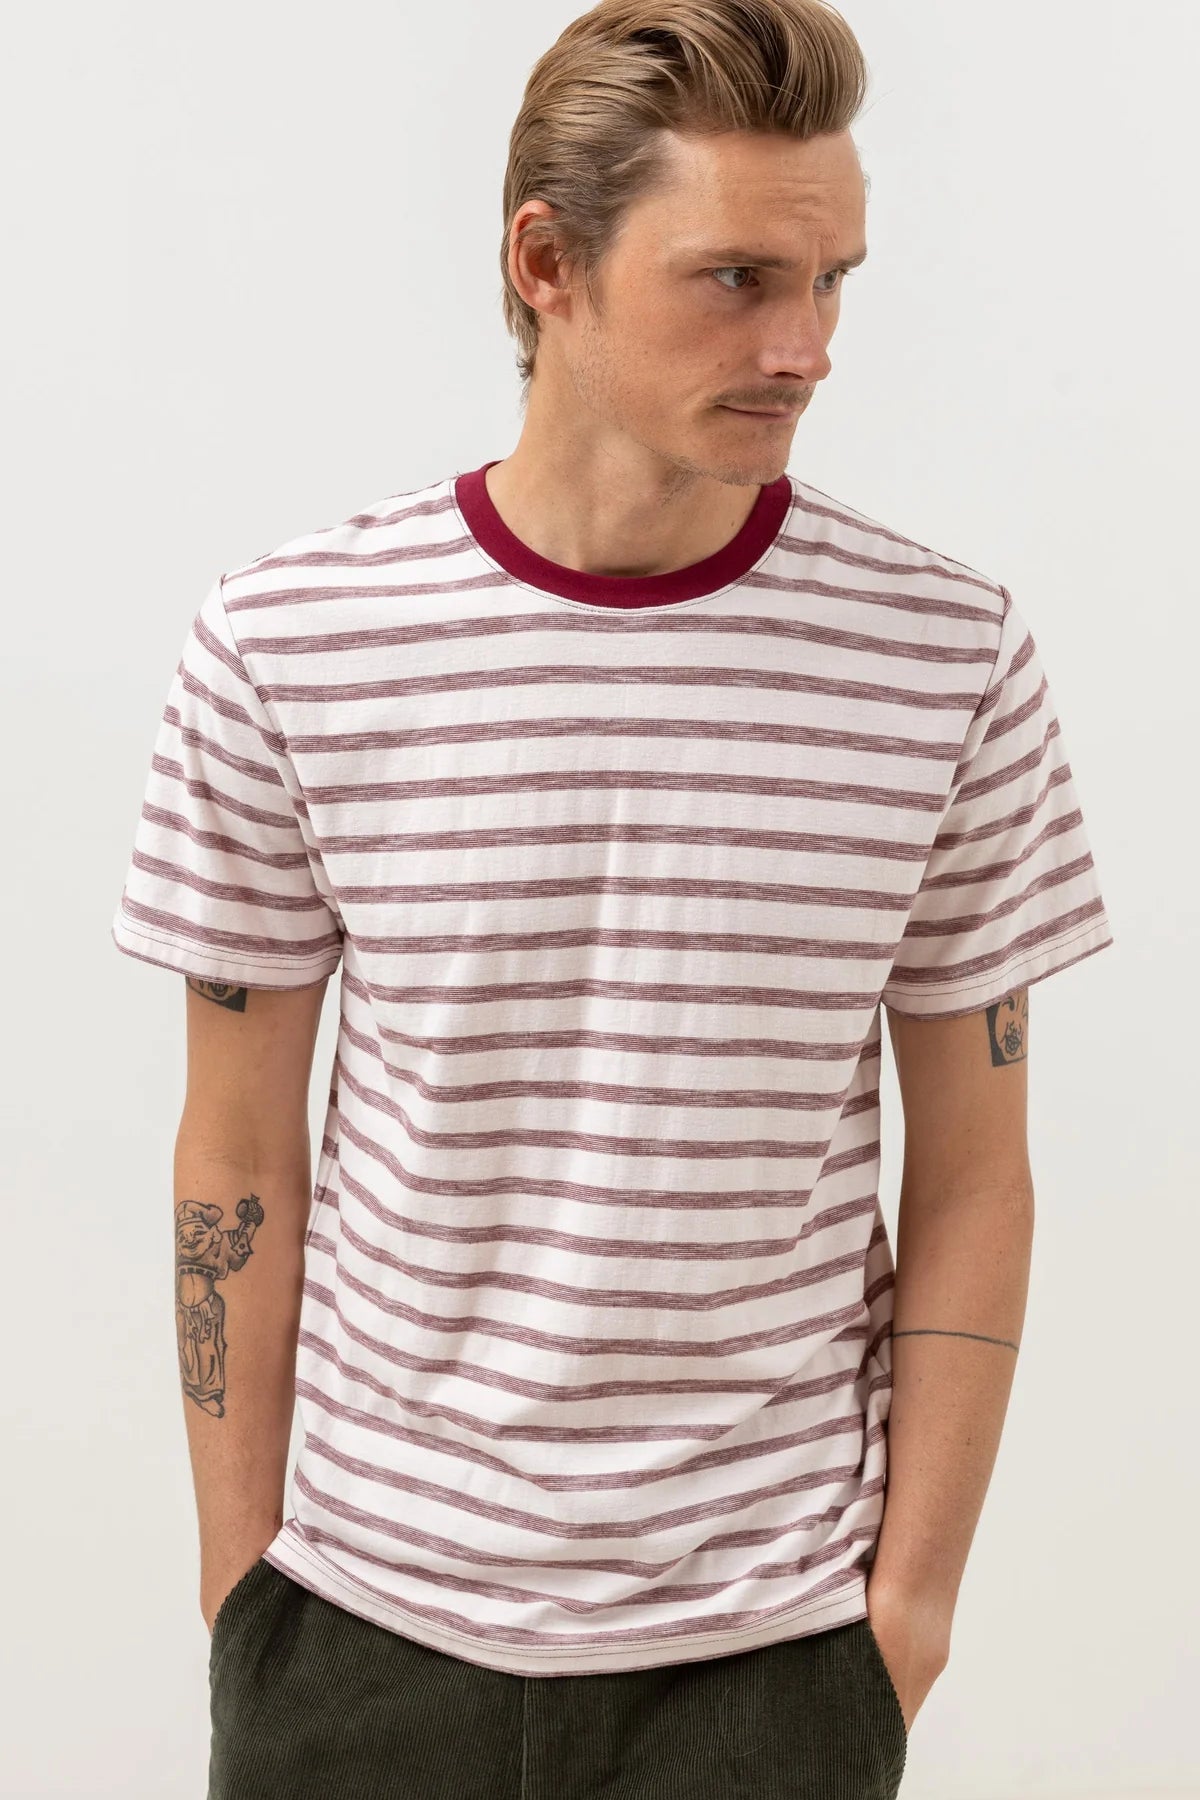 rhythm everyday striped short sleeve t short mulberry shirt kempt athens ga mens clothing store downtown athens ga shipping